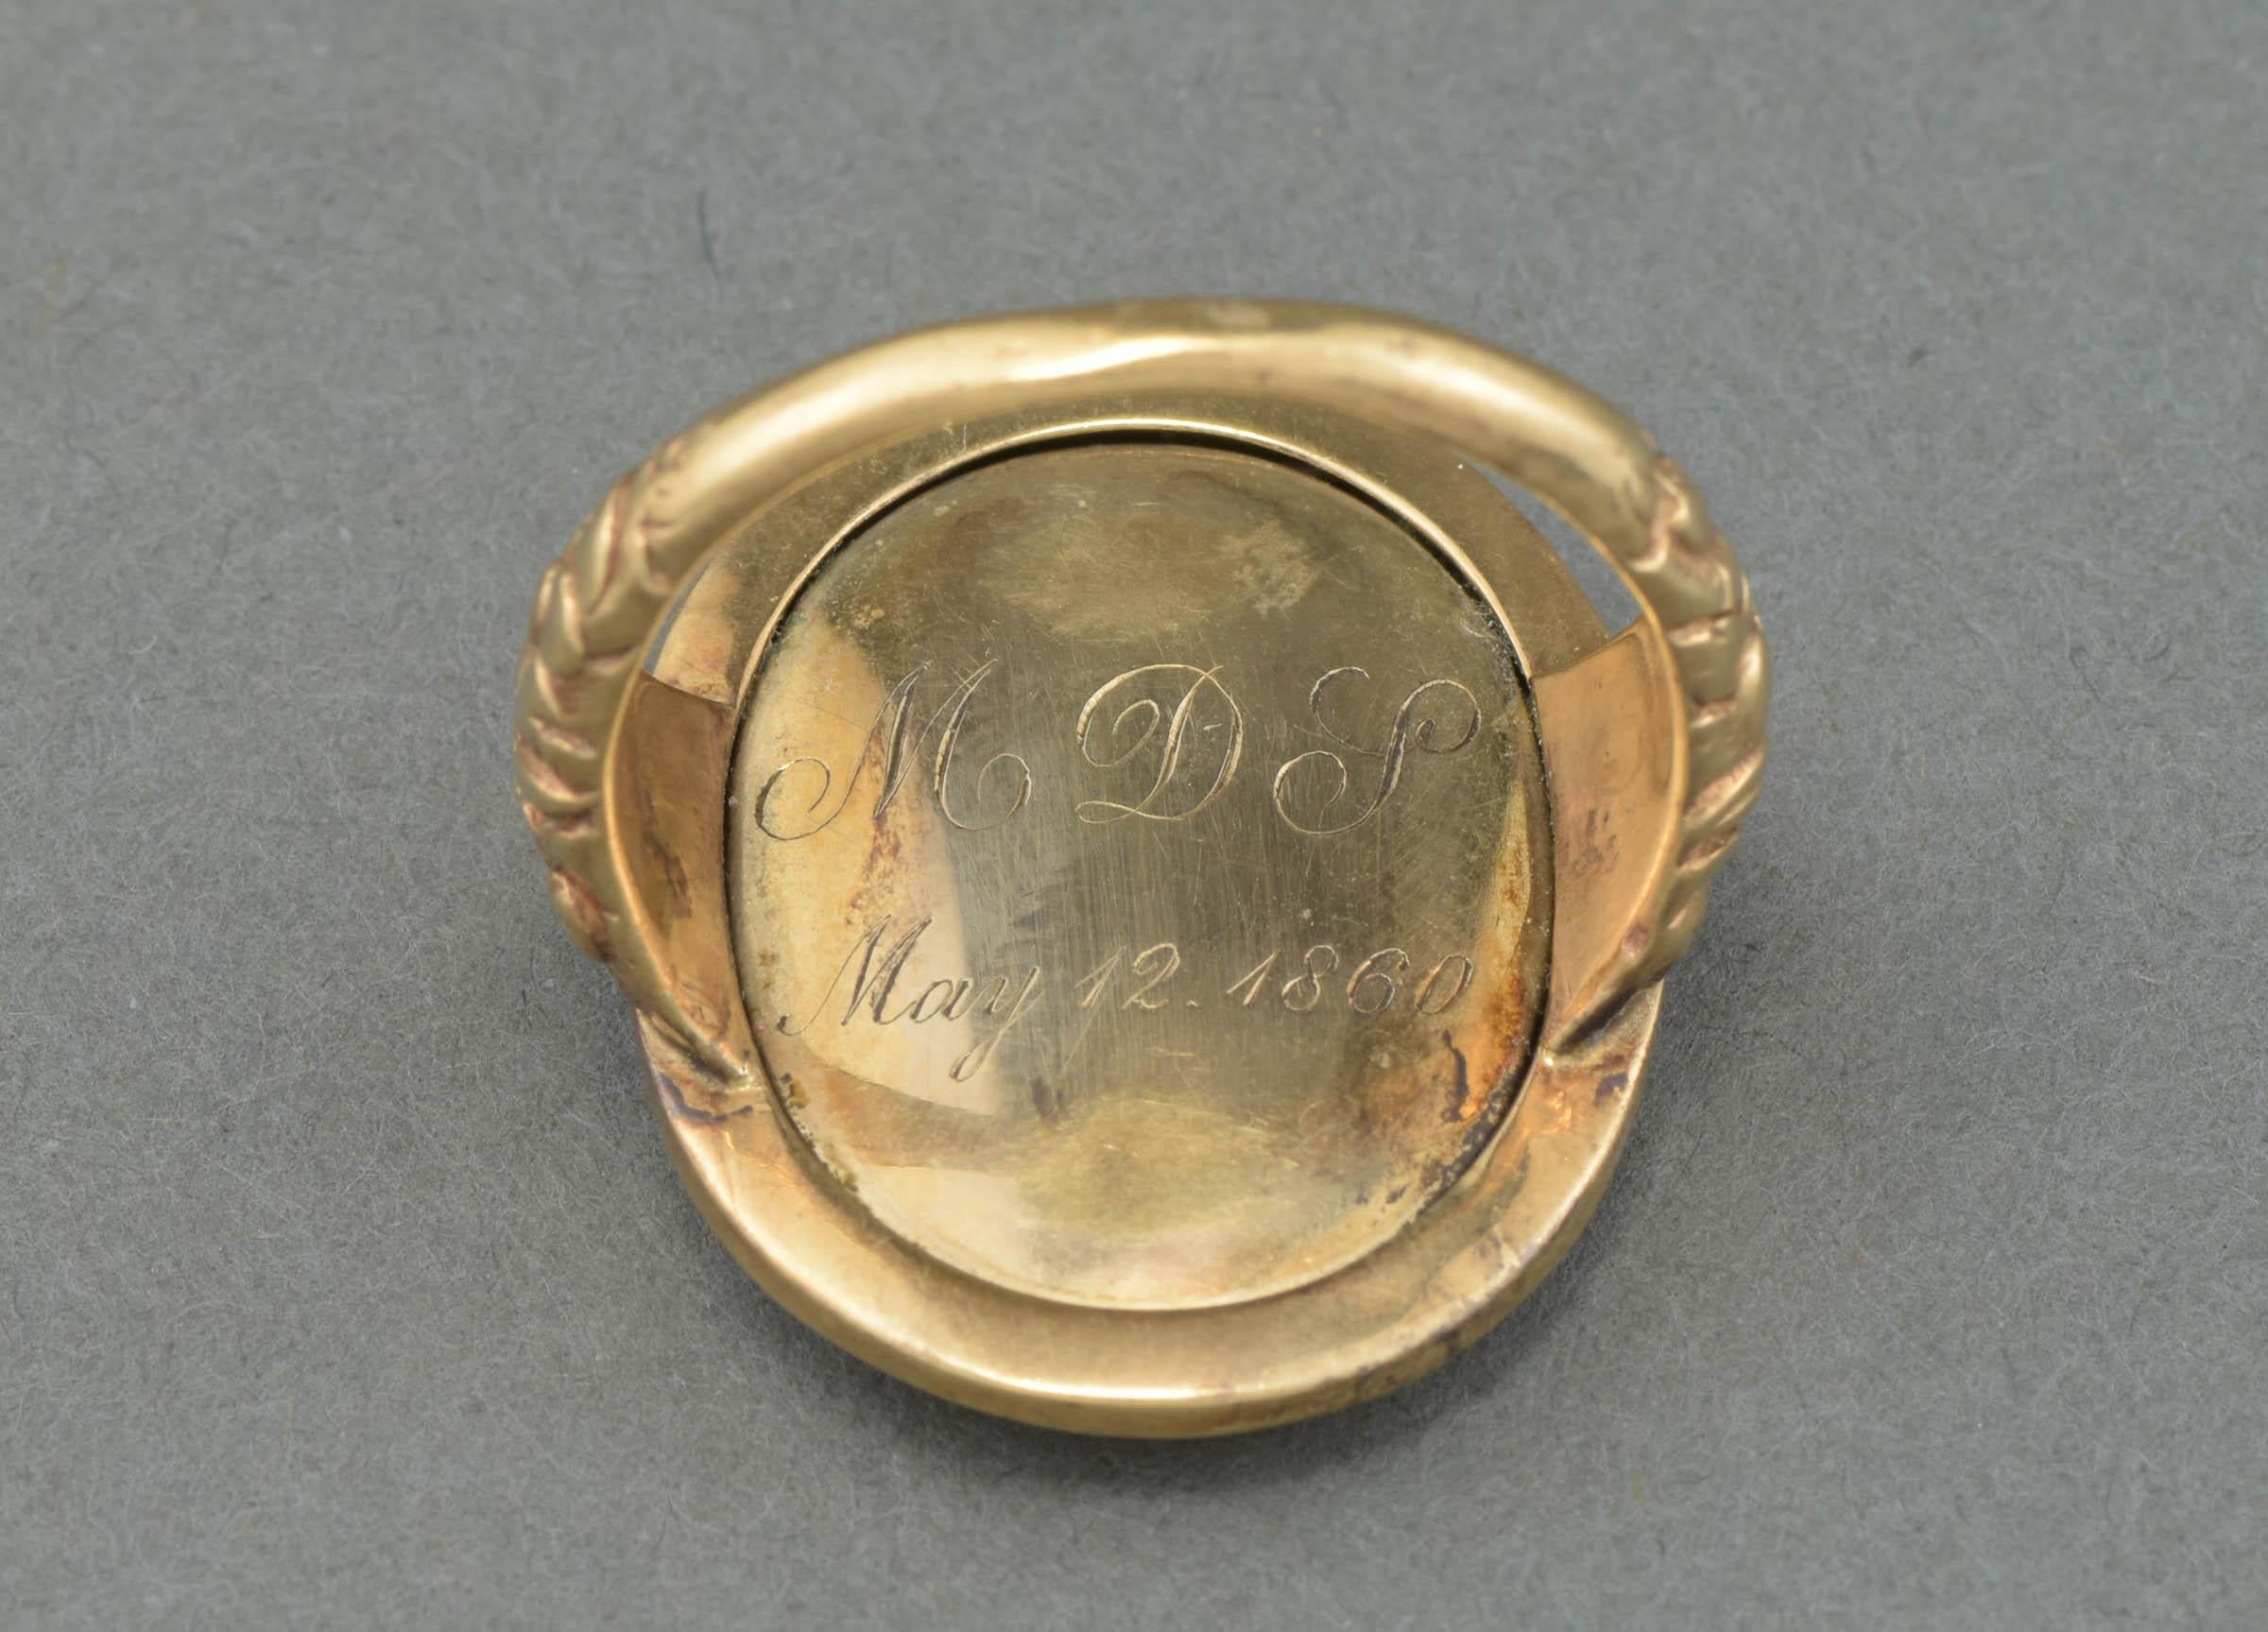 Antique Large Gold Locket Faced Ring with Hair Work, Engraved 1860 For Sale 4